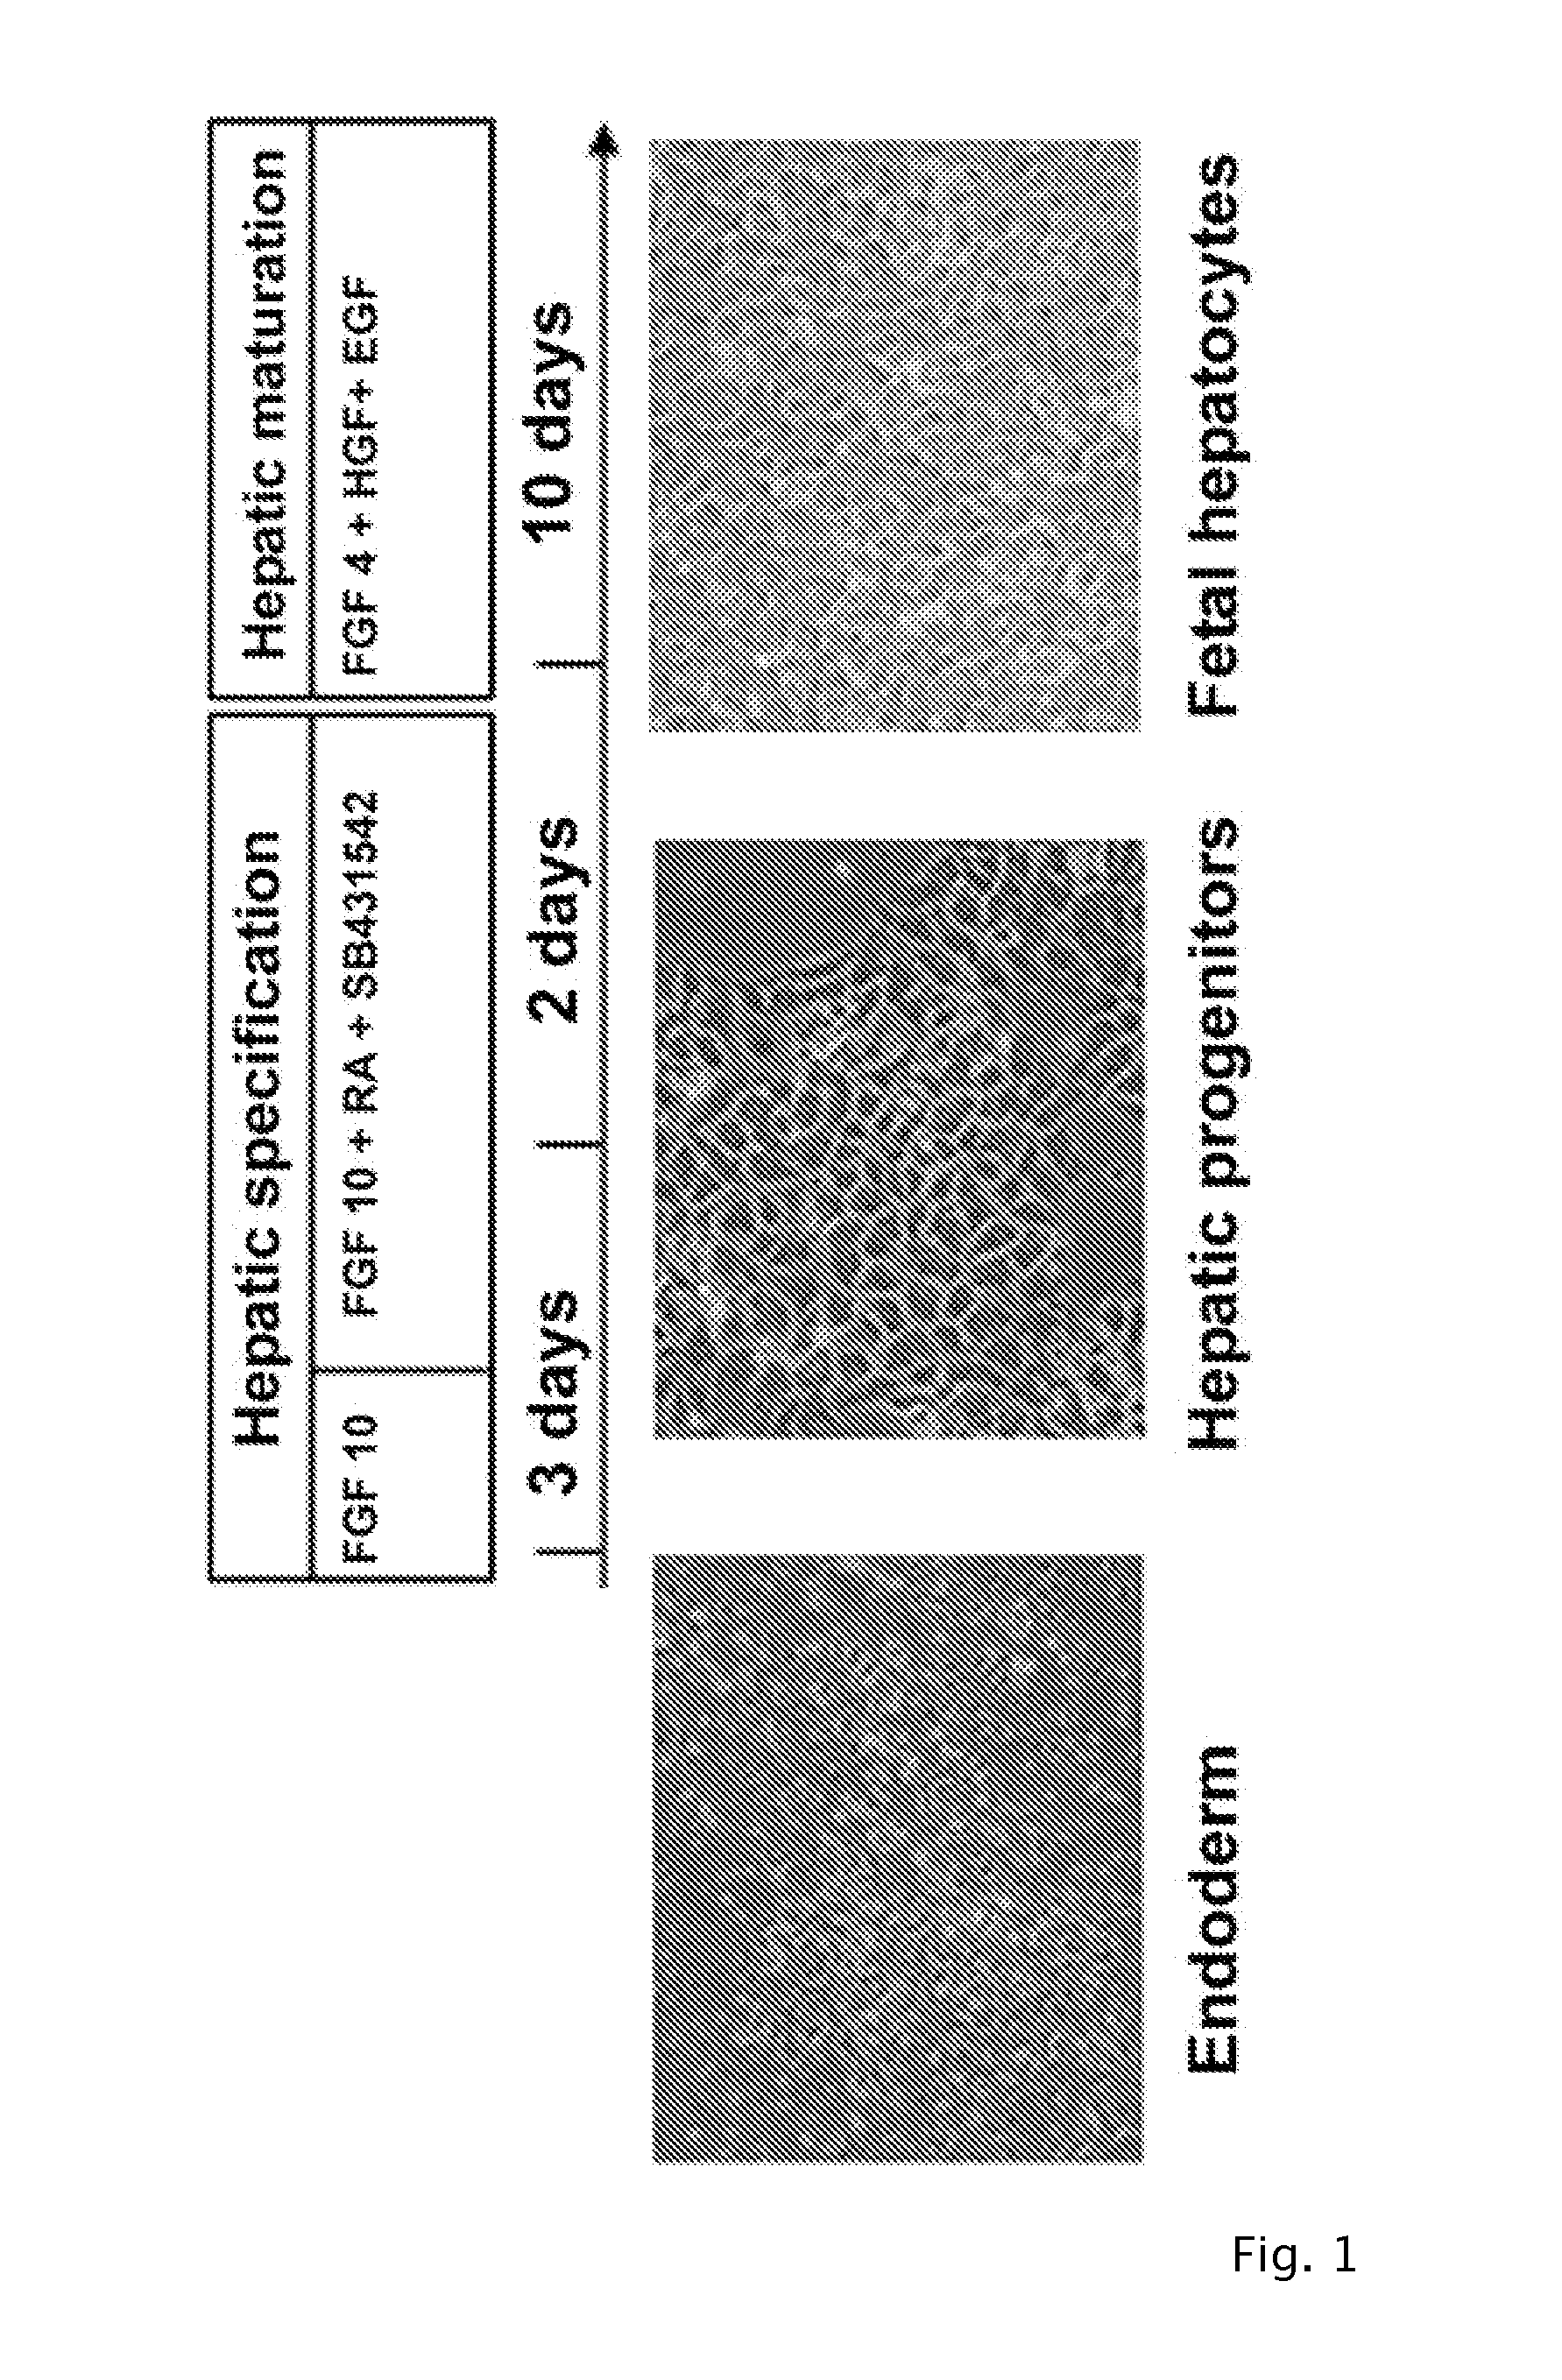 Method for hepatic differentiation of definitive endoderm cells